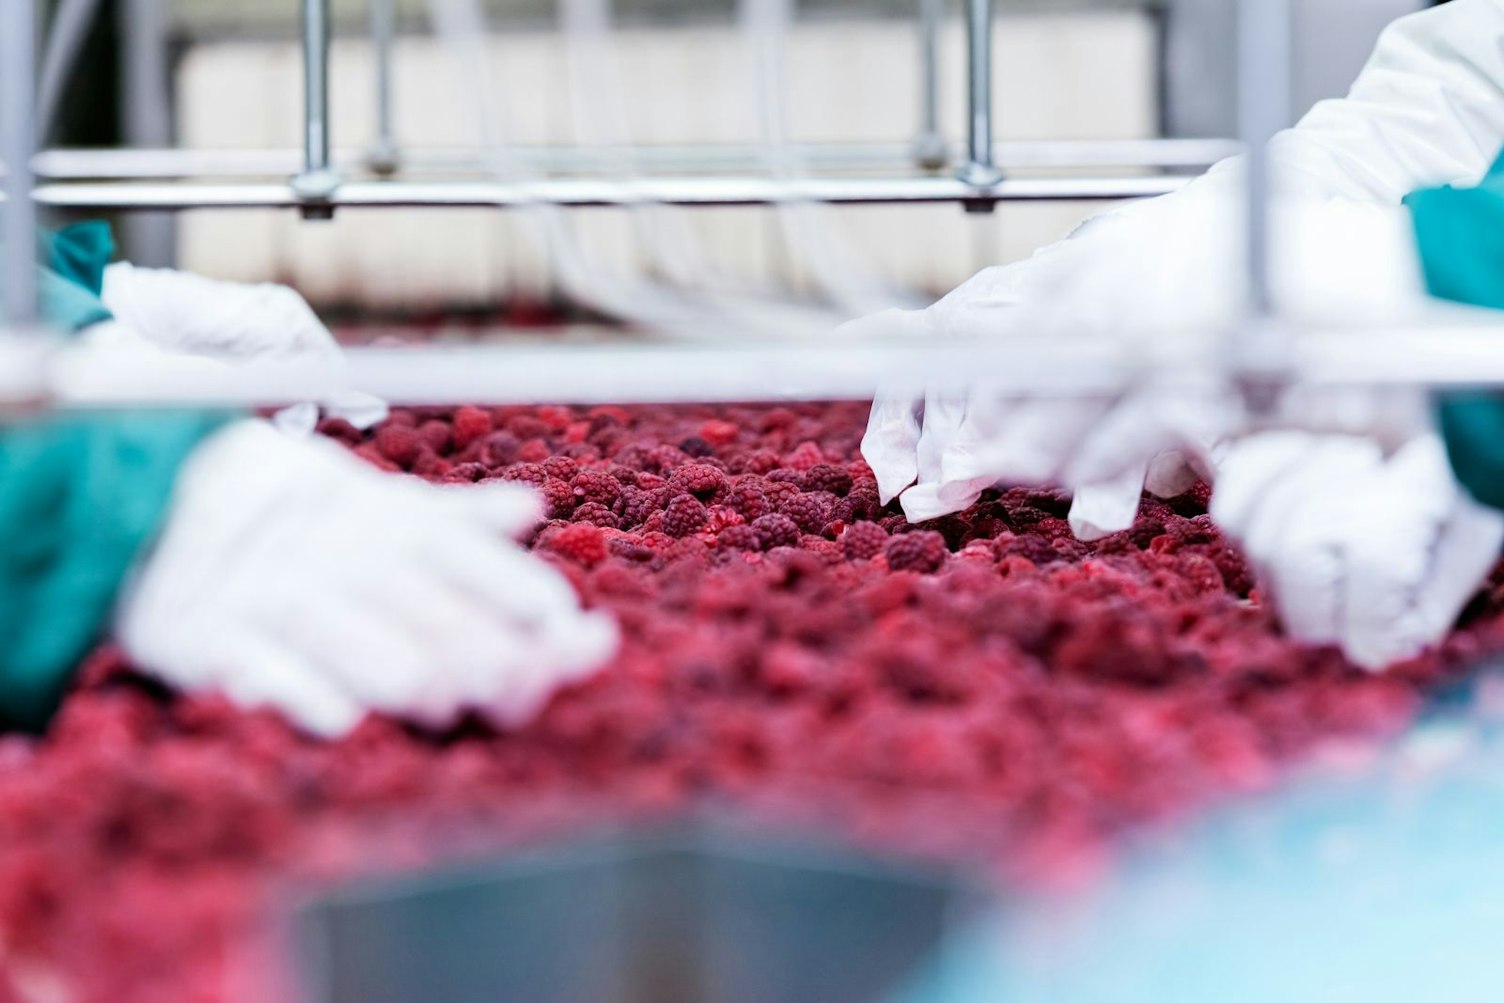 Frozen Red Raspberries in Sorting and Processing Machines